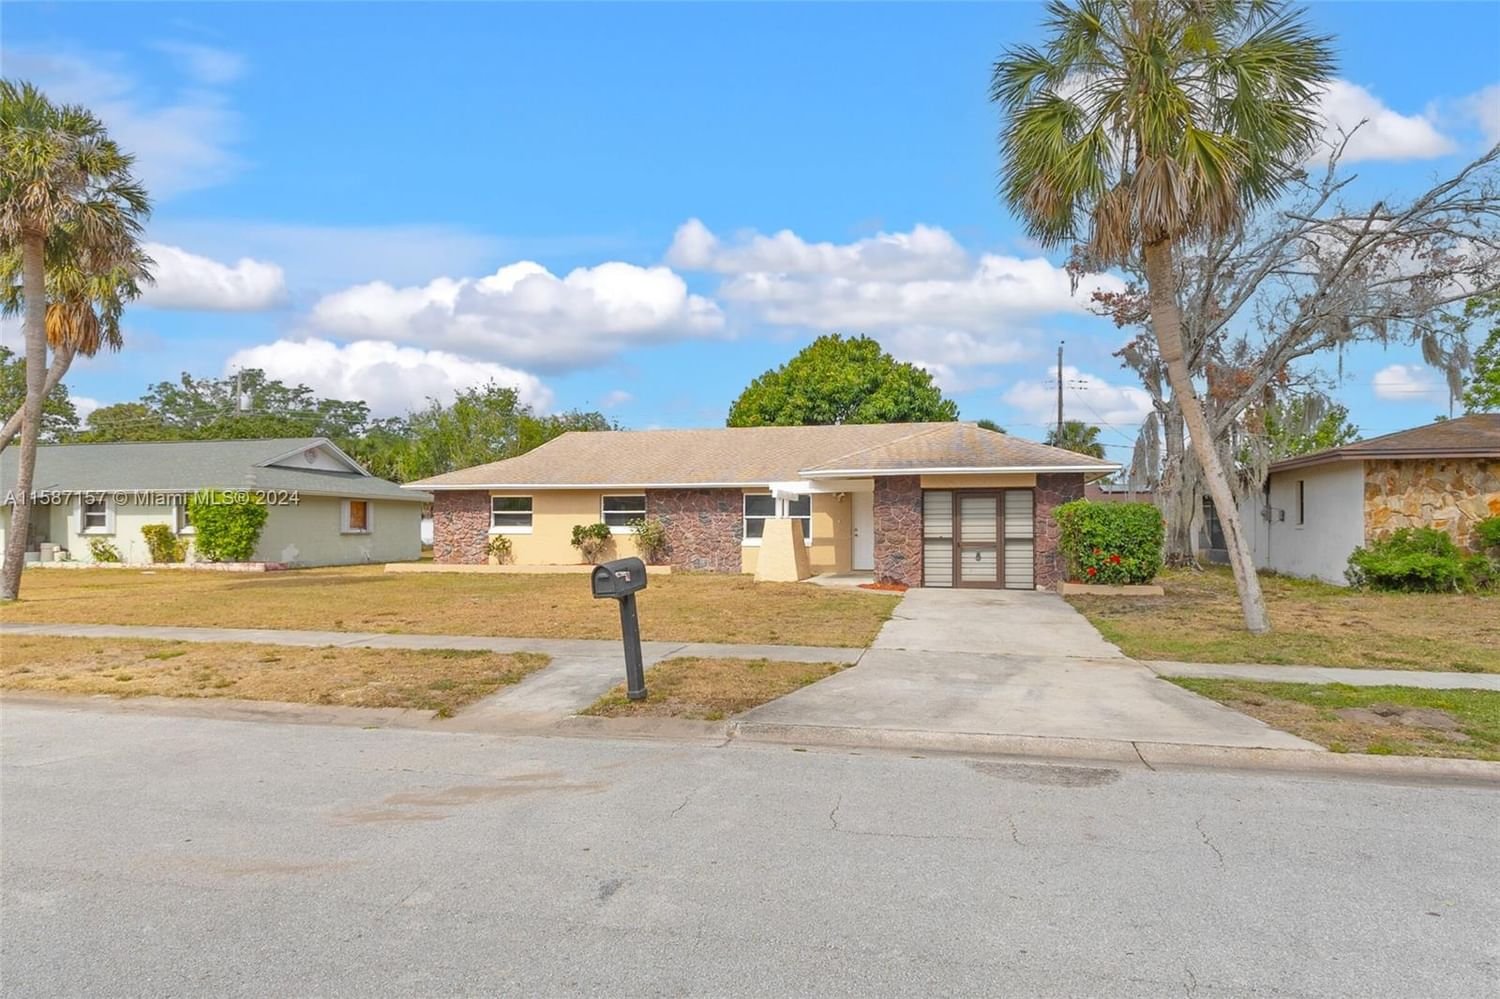 Real estate property located at 1036 Pompano Dr, Brevard County, MARLIN SUBD, Rockledge, FL